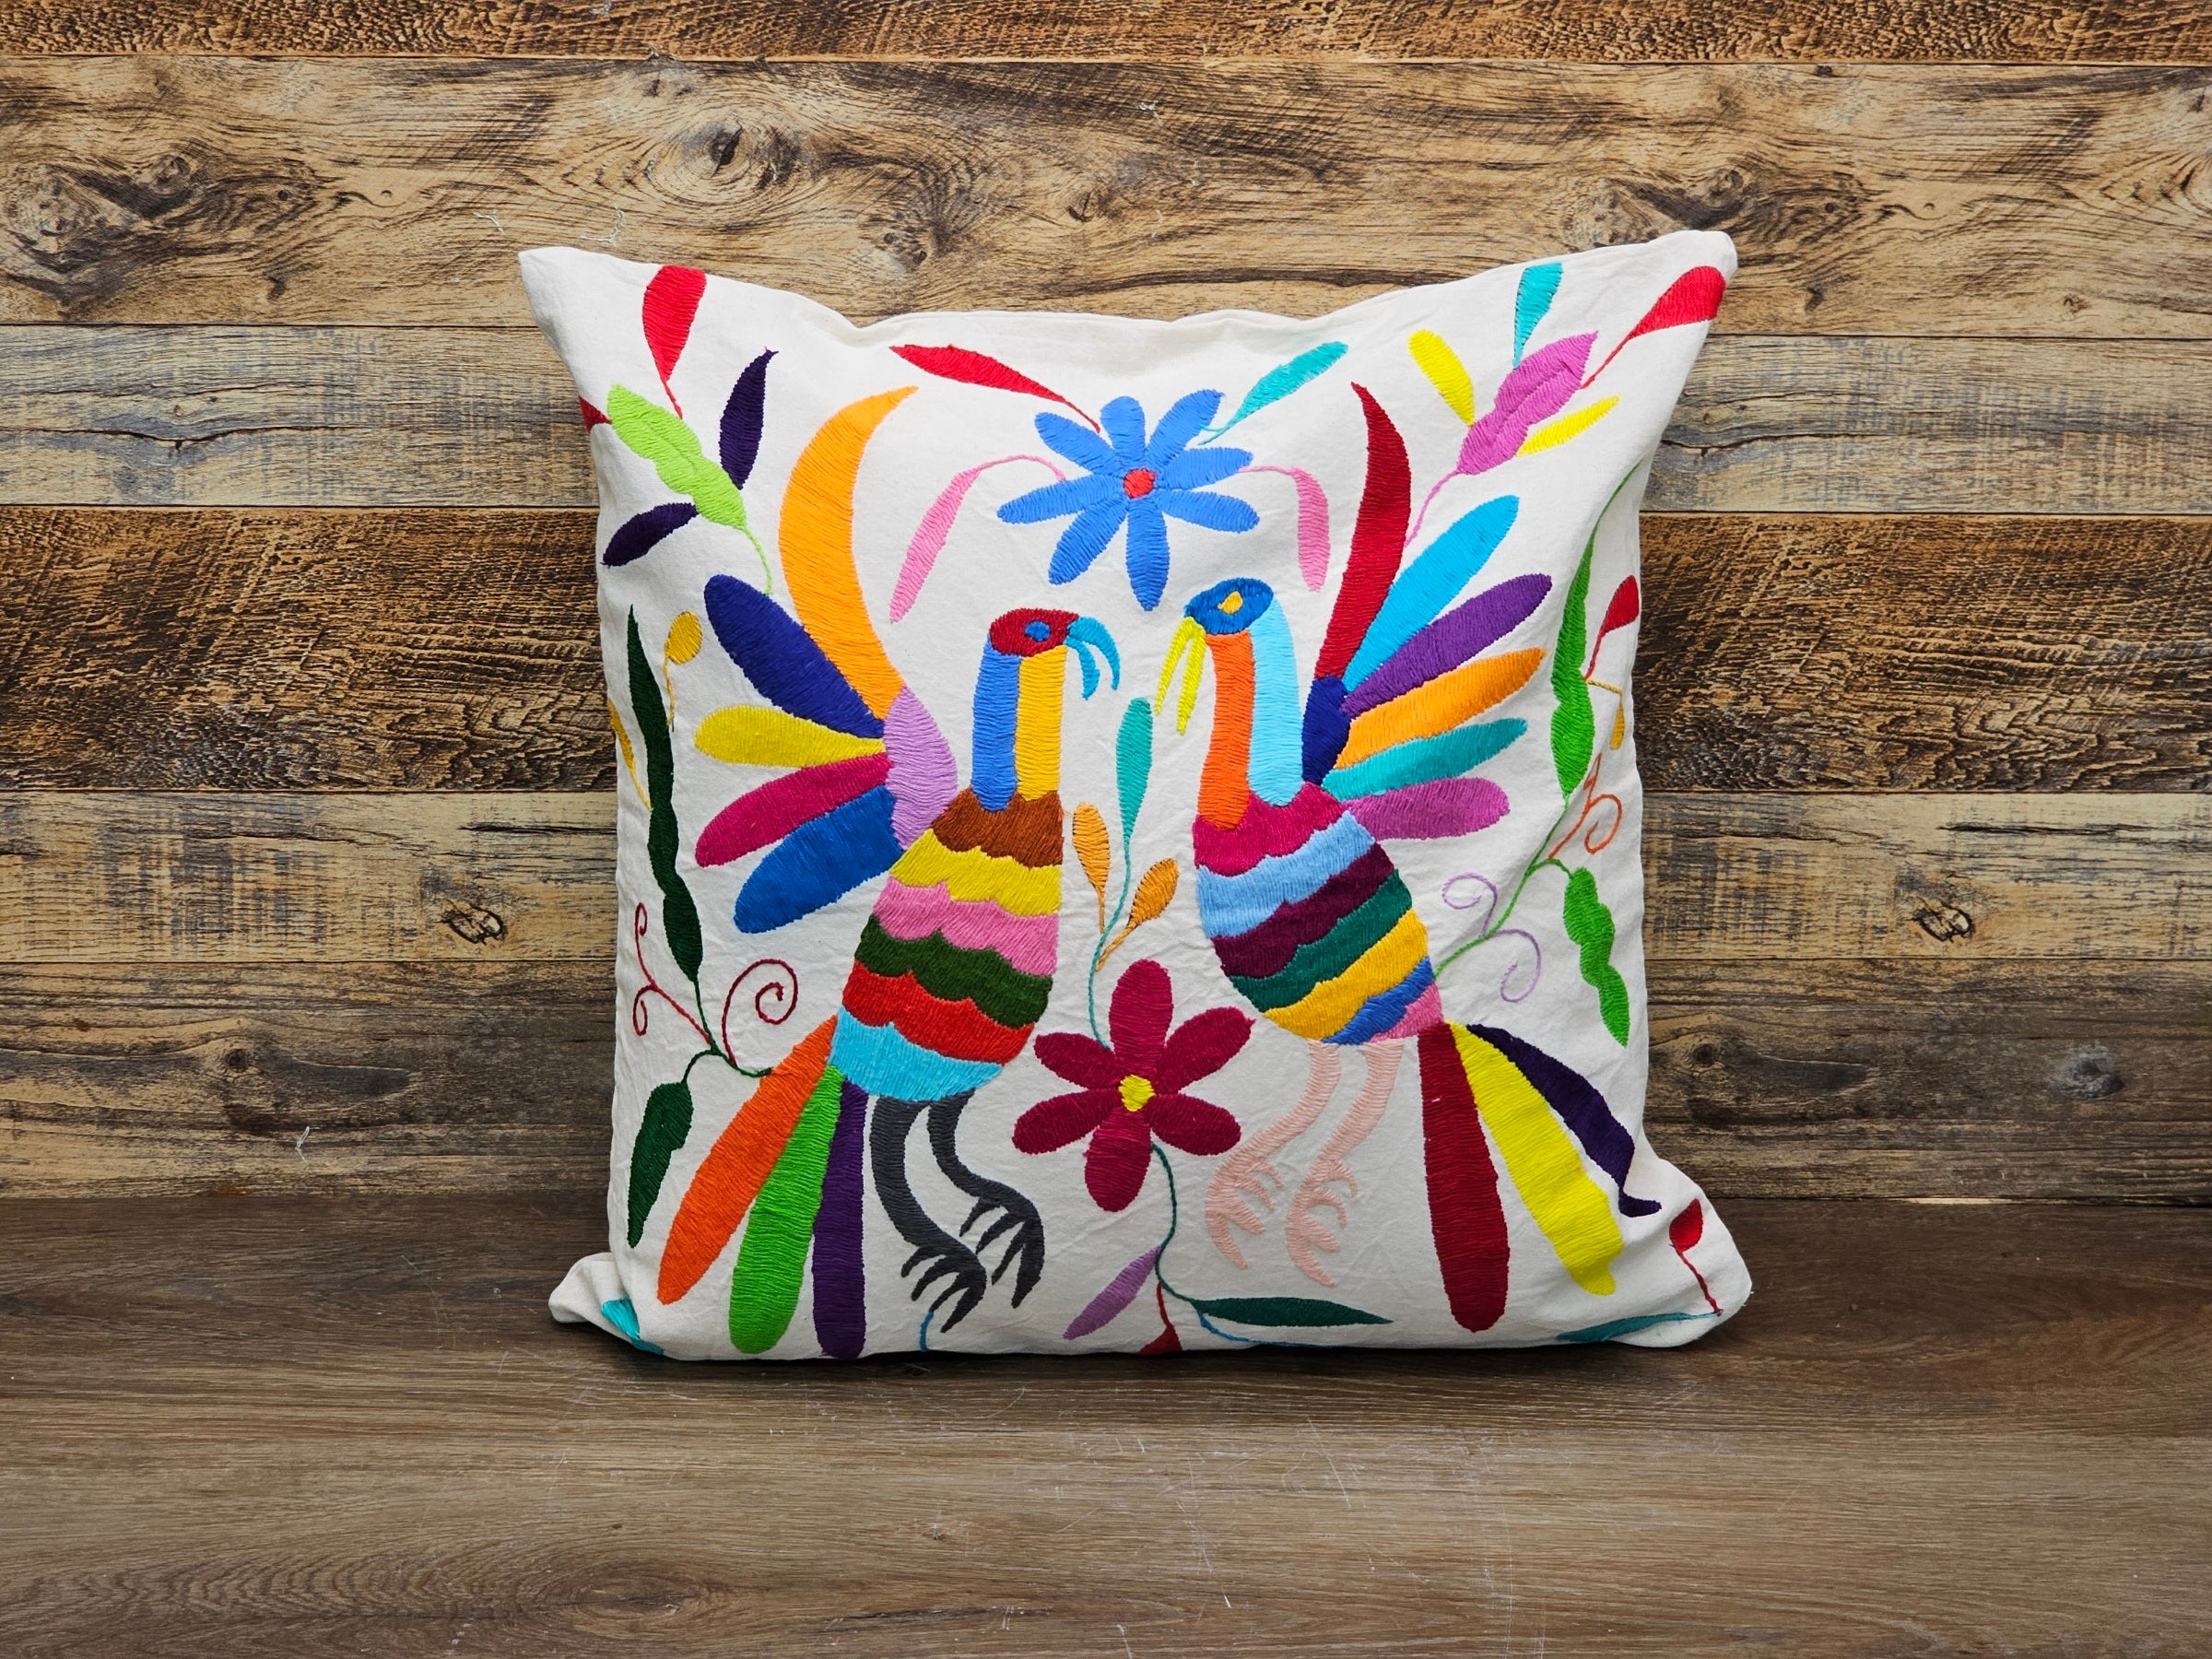 Rainbow Color Square Otomi Tenango Pillow Cover Handmade and Hand Embroidered in Mexico. Ships from the USA. Buy now at www.felipeandgrace.com.